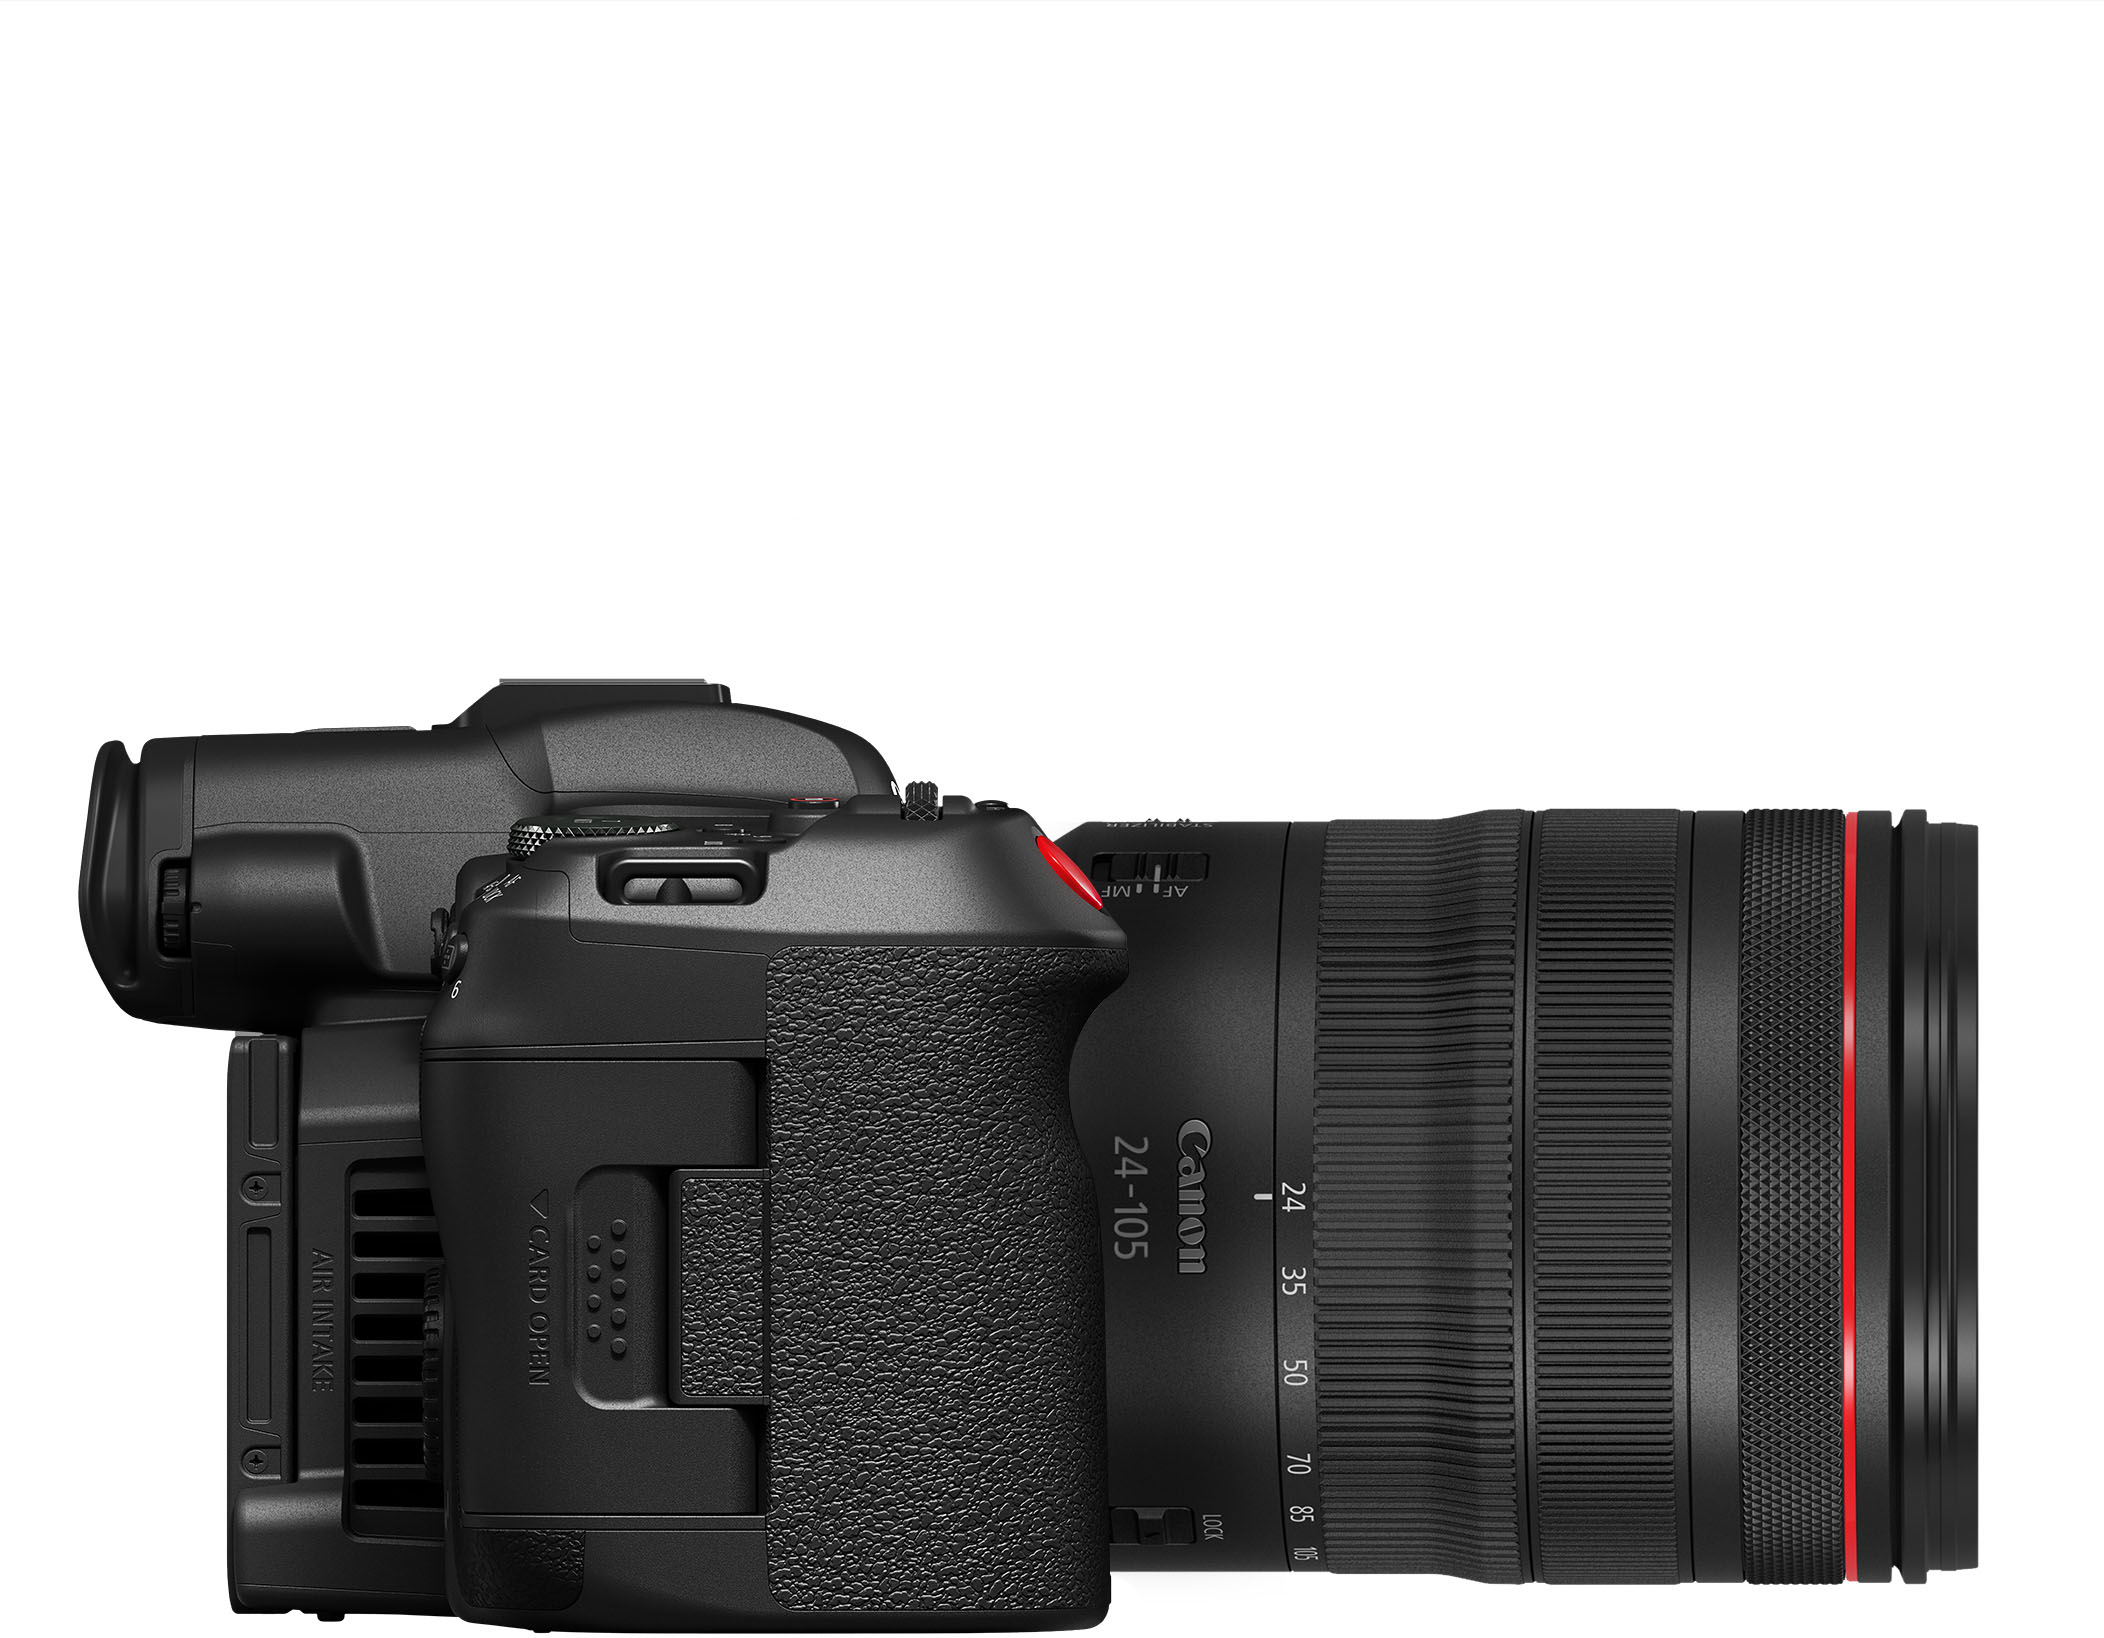 Angle View: Canon - EOS M50 Mirrorless Camera with EF-M 15-45mm f/3.5-6.3 IS STM Zoom Lens Video Creator Kit - Black